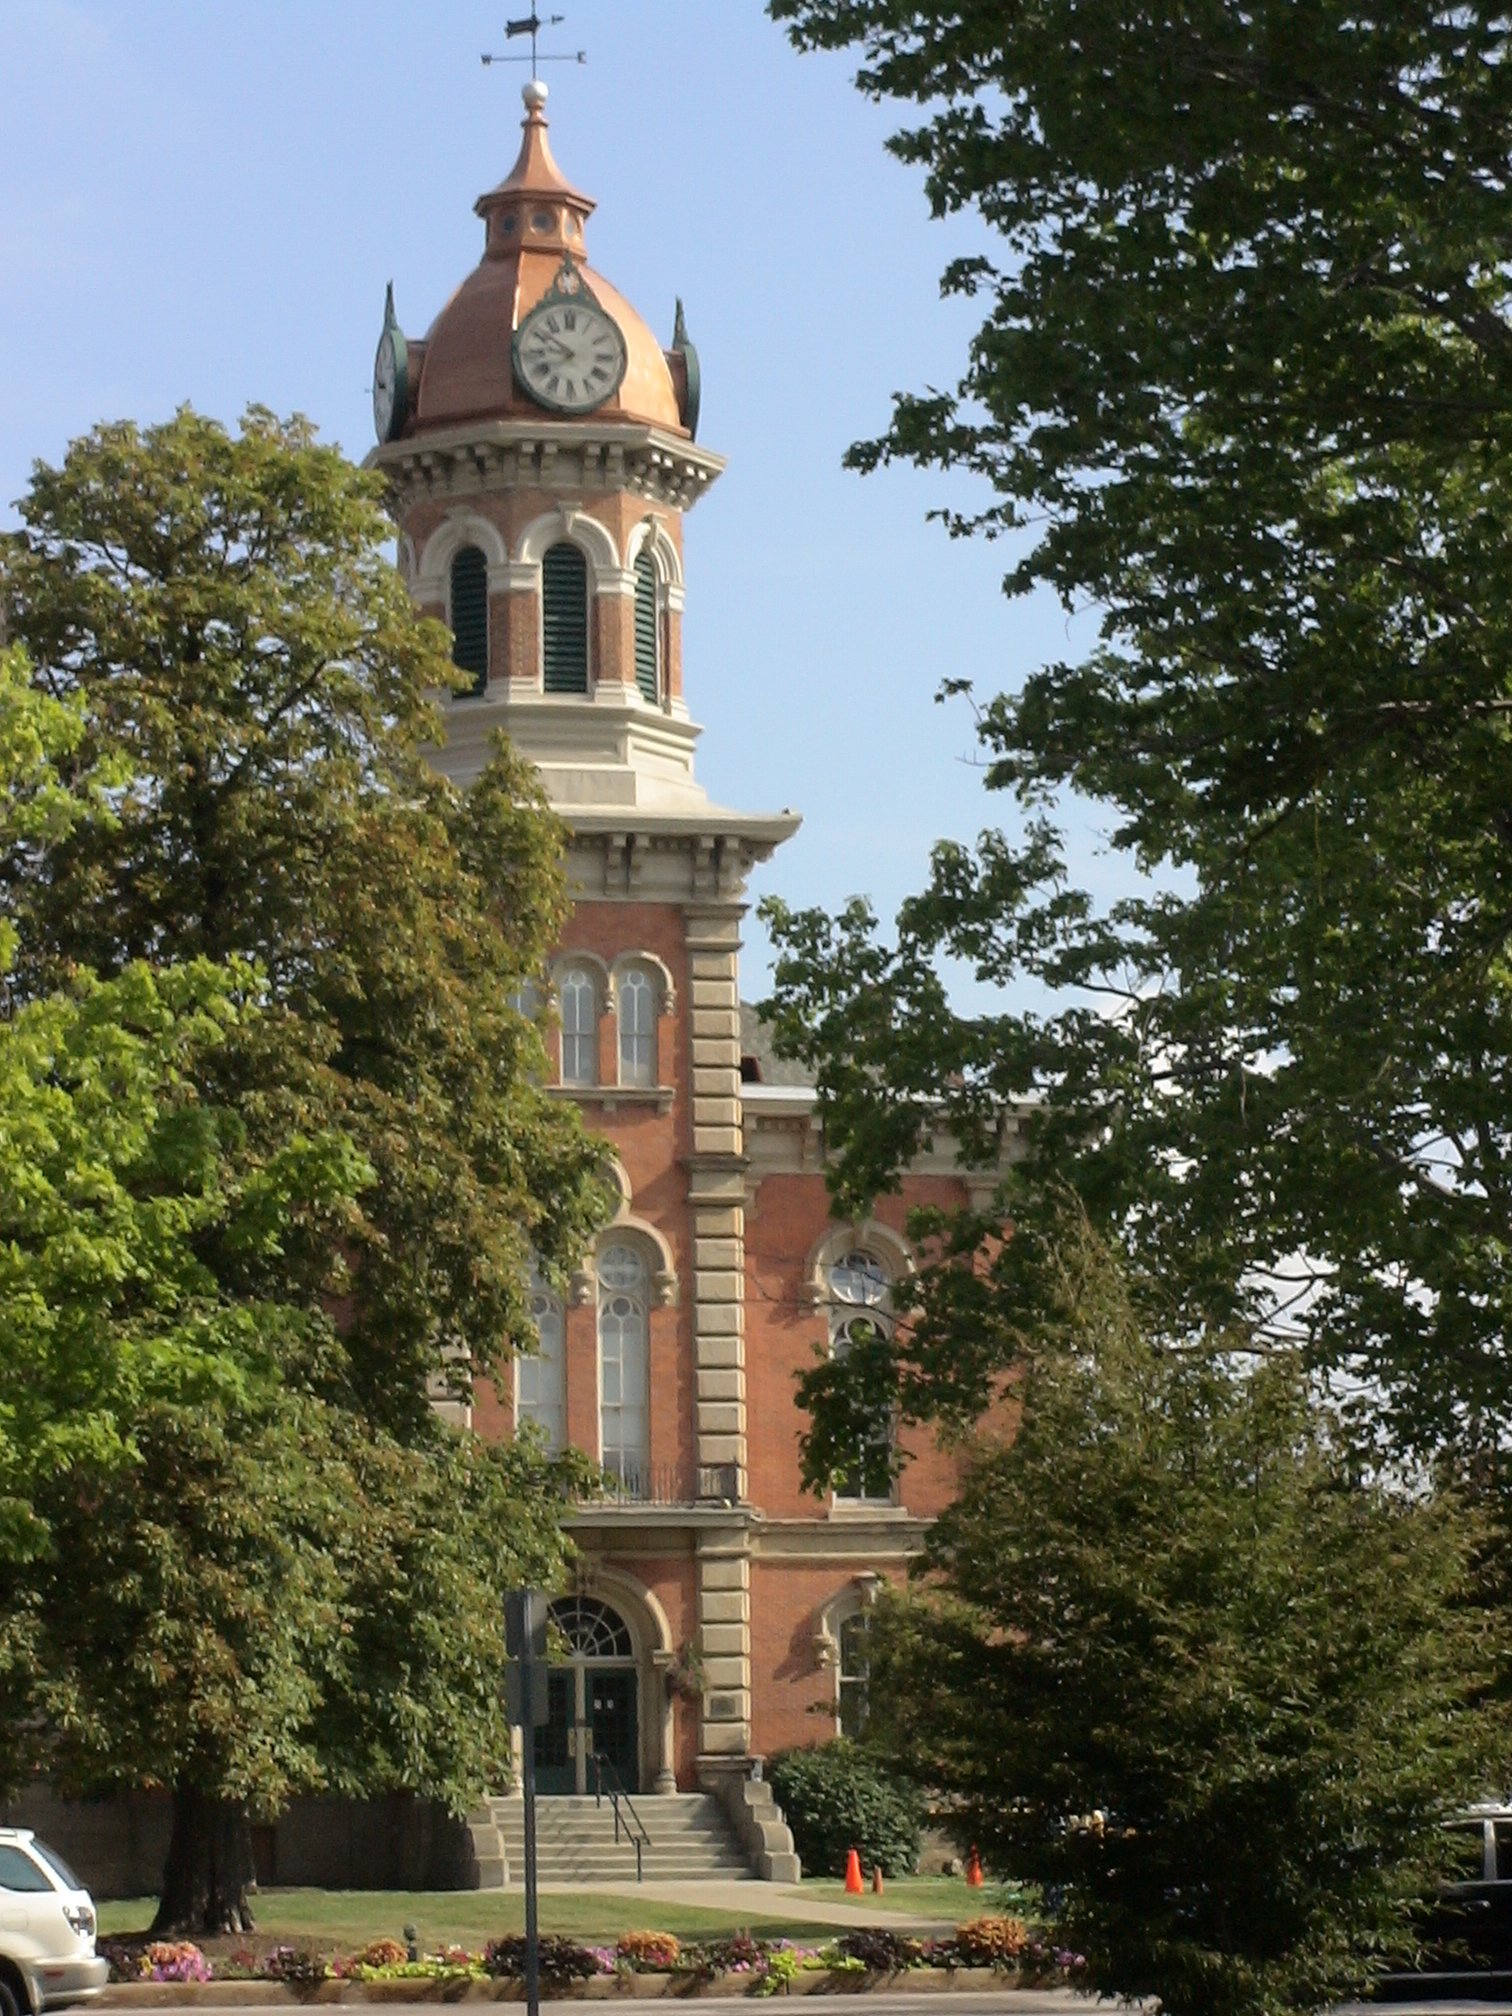 Historic Geauga County Courthouse